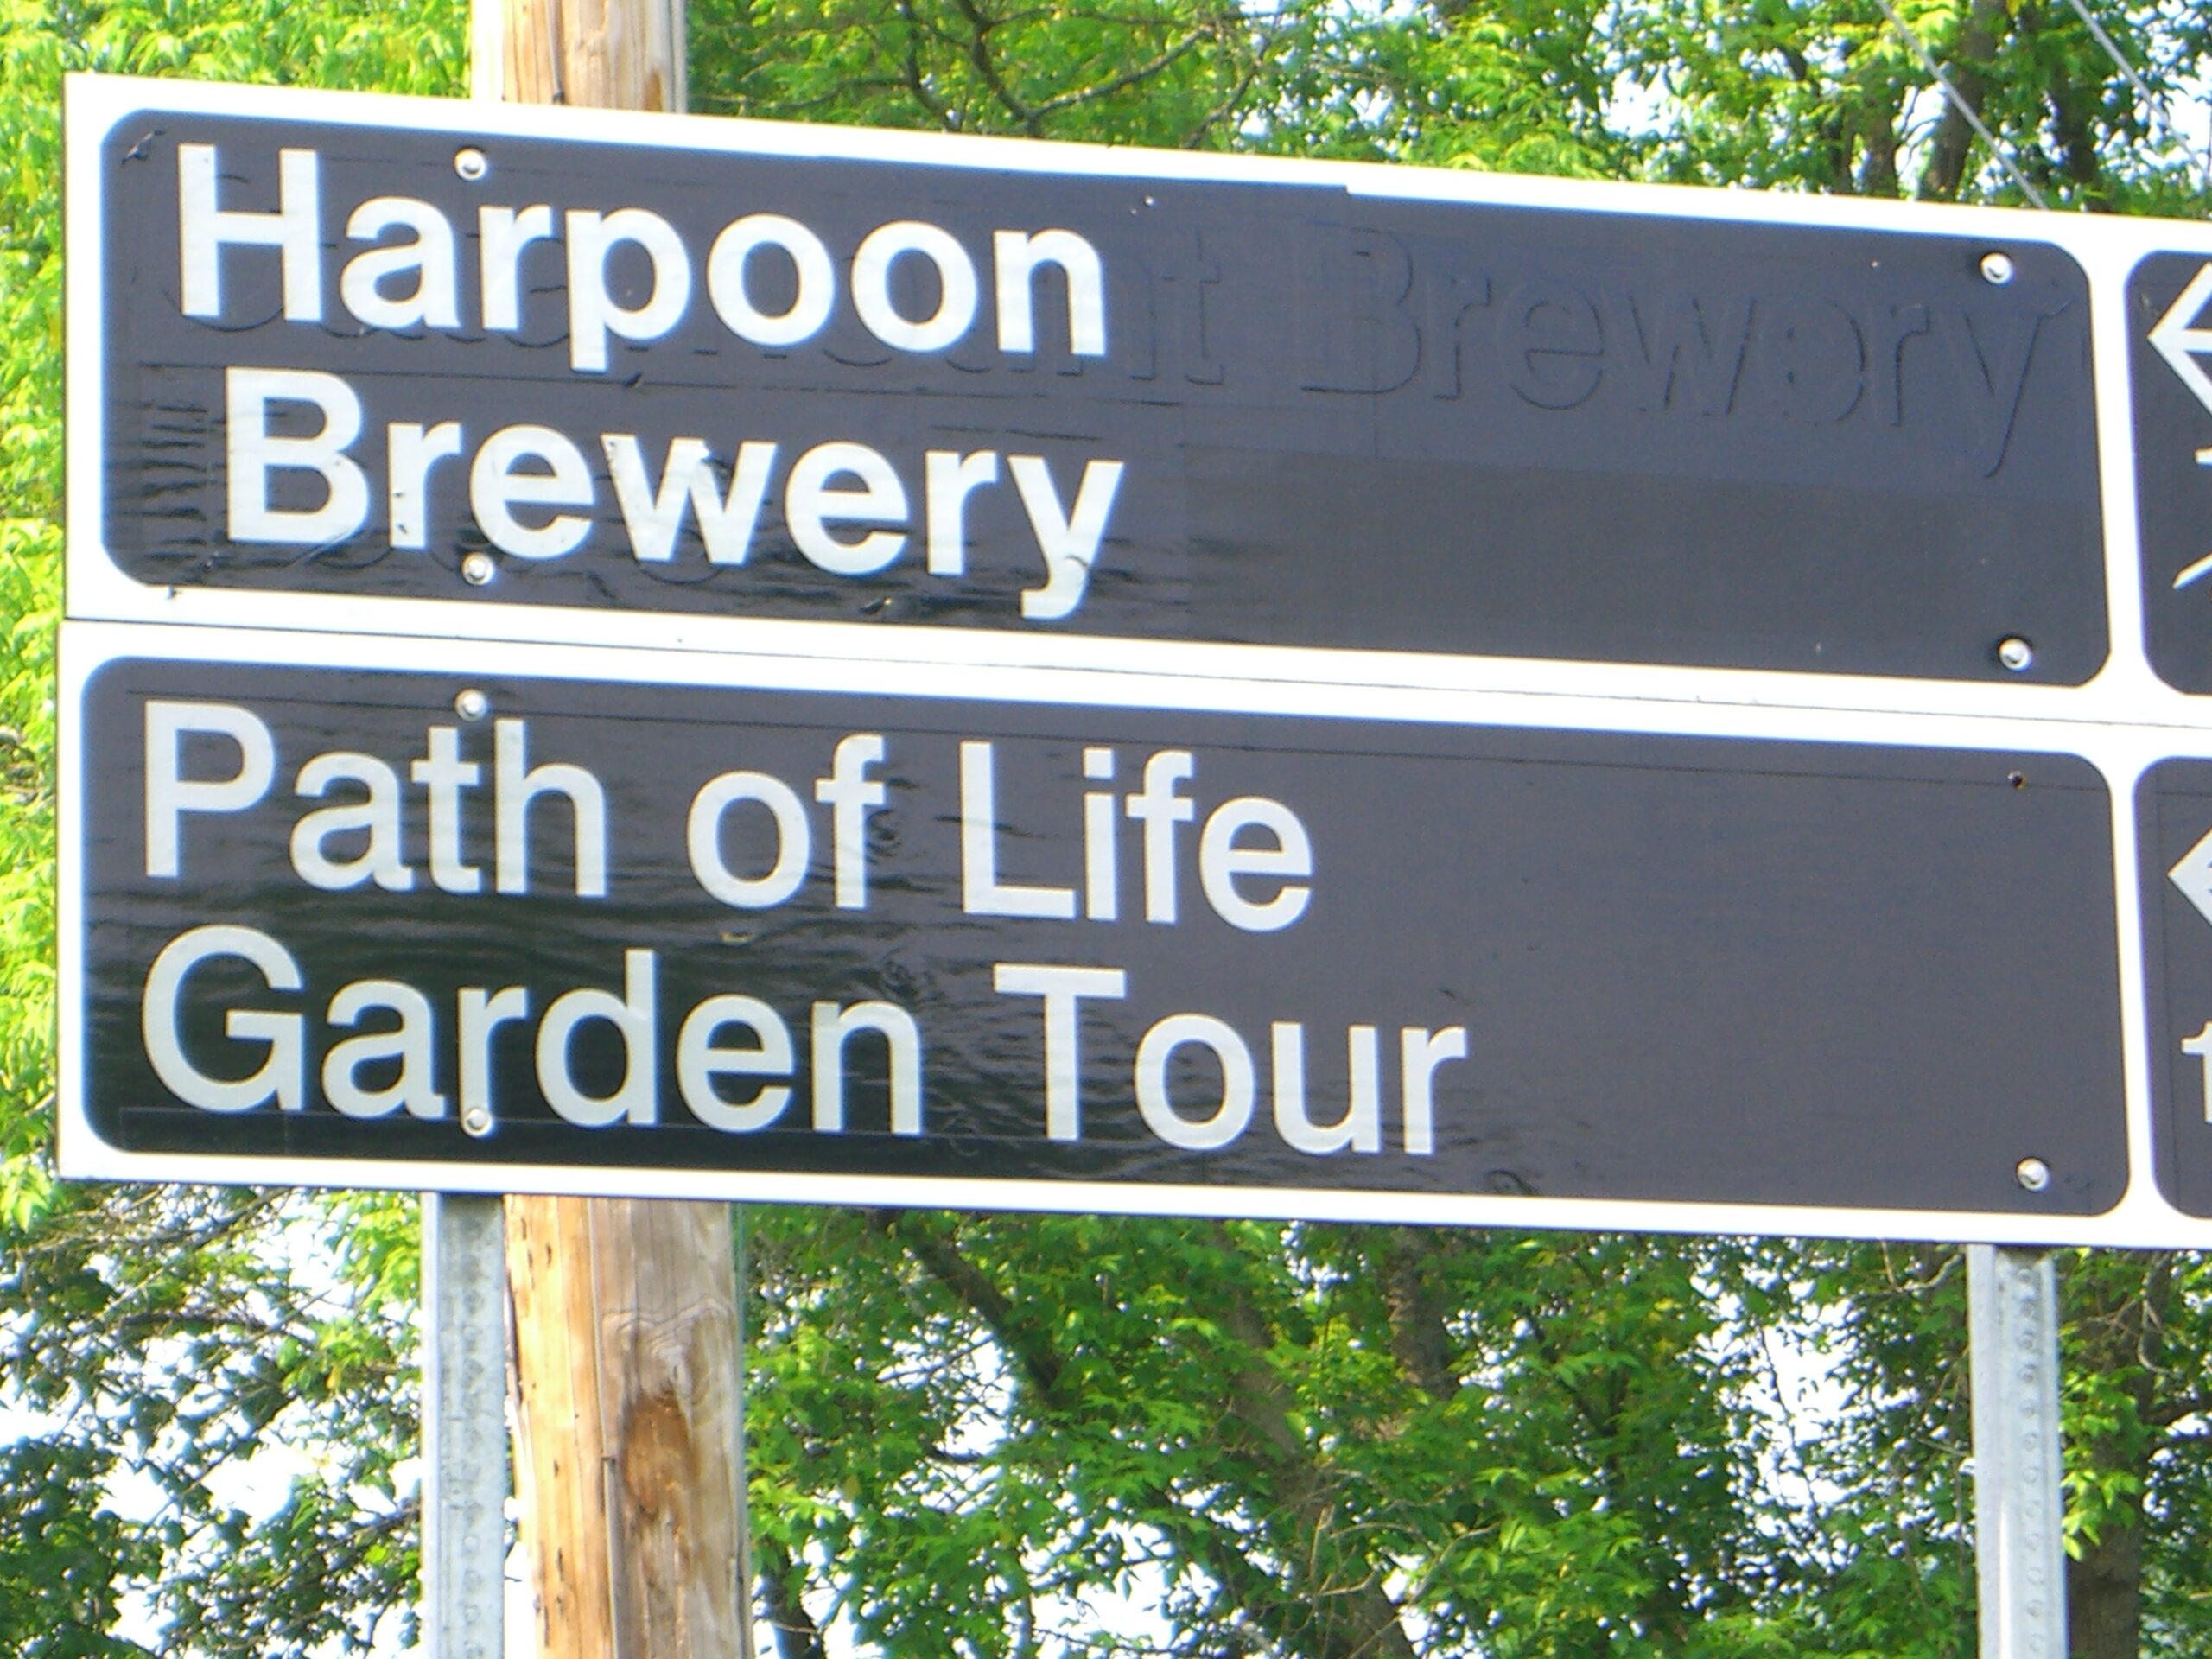 A road sign in Windsor, Vermont advertises a "Path of Life" Garden Tour.